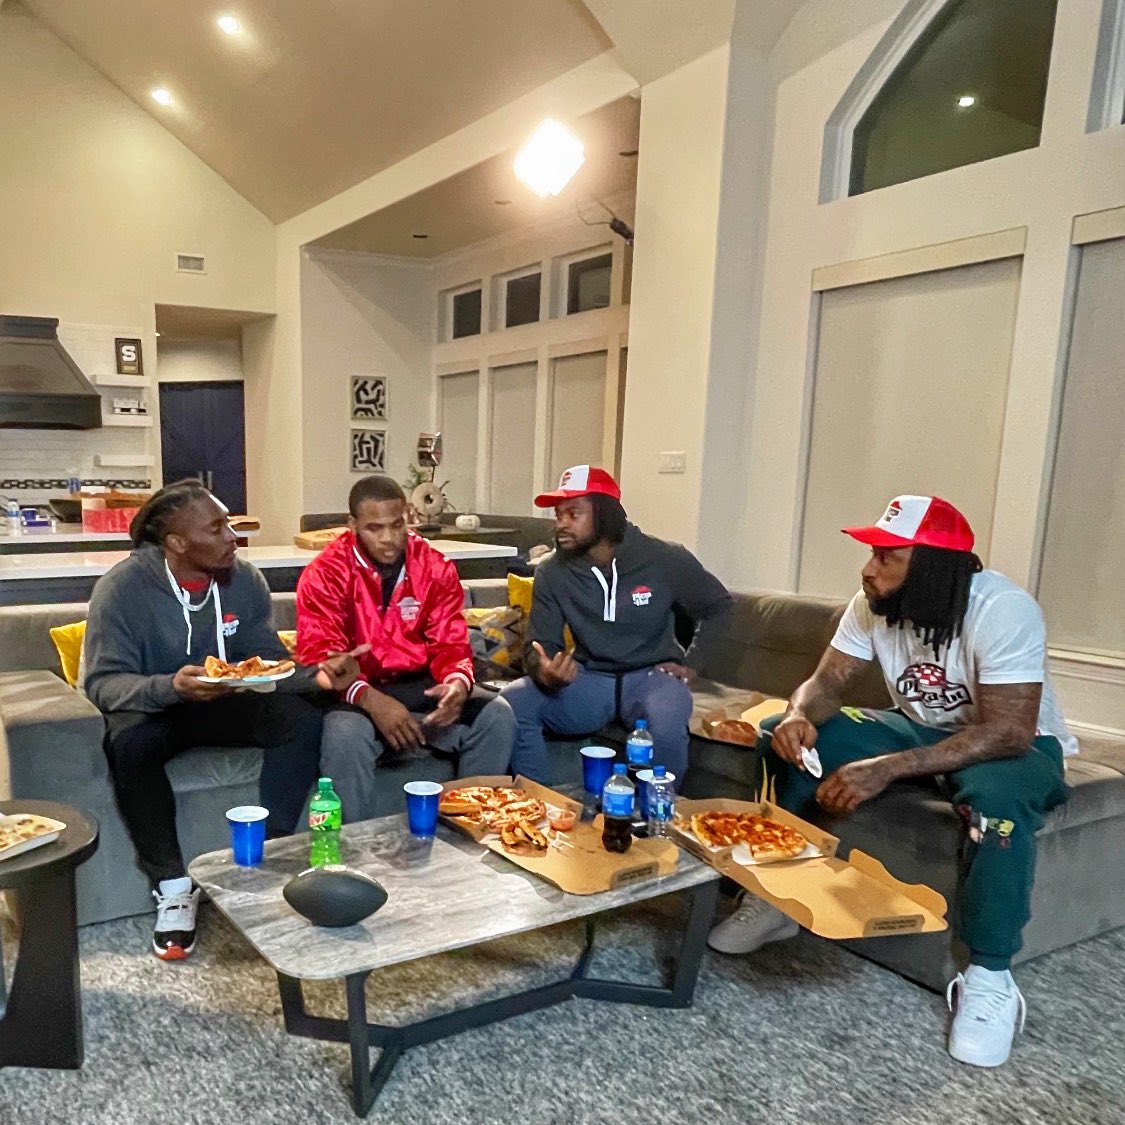 Fueling up for the next hunt! 🤘🏿Homegating with @pizzahut and my dogs @MicahhParsons11 @TrevonDiggs & @MalikHooker24 for Monday Night Football. #PizzaHutPartner